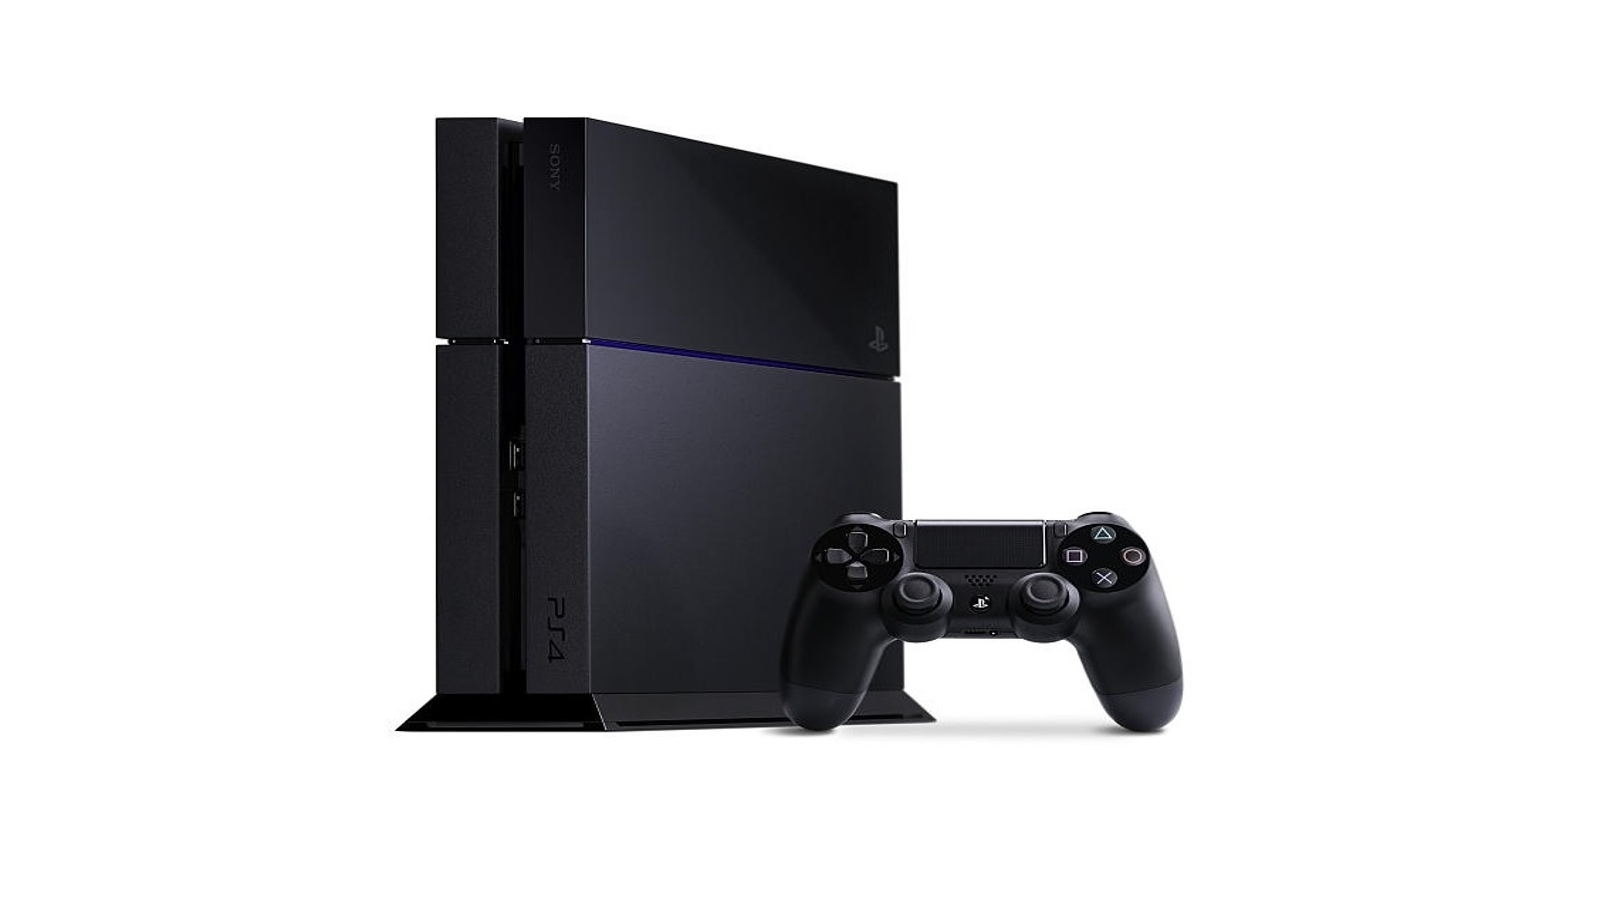 PS4 hardware loss will be covered by launch purchases, Sony hopes